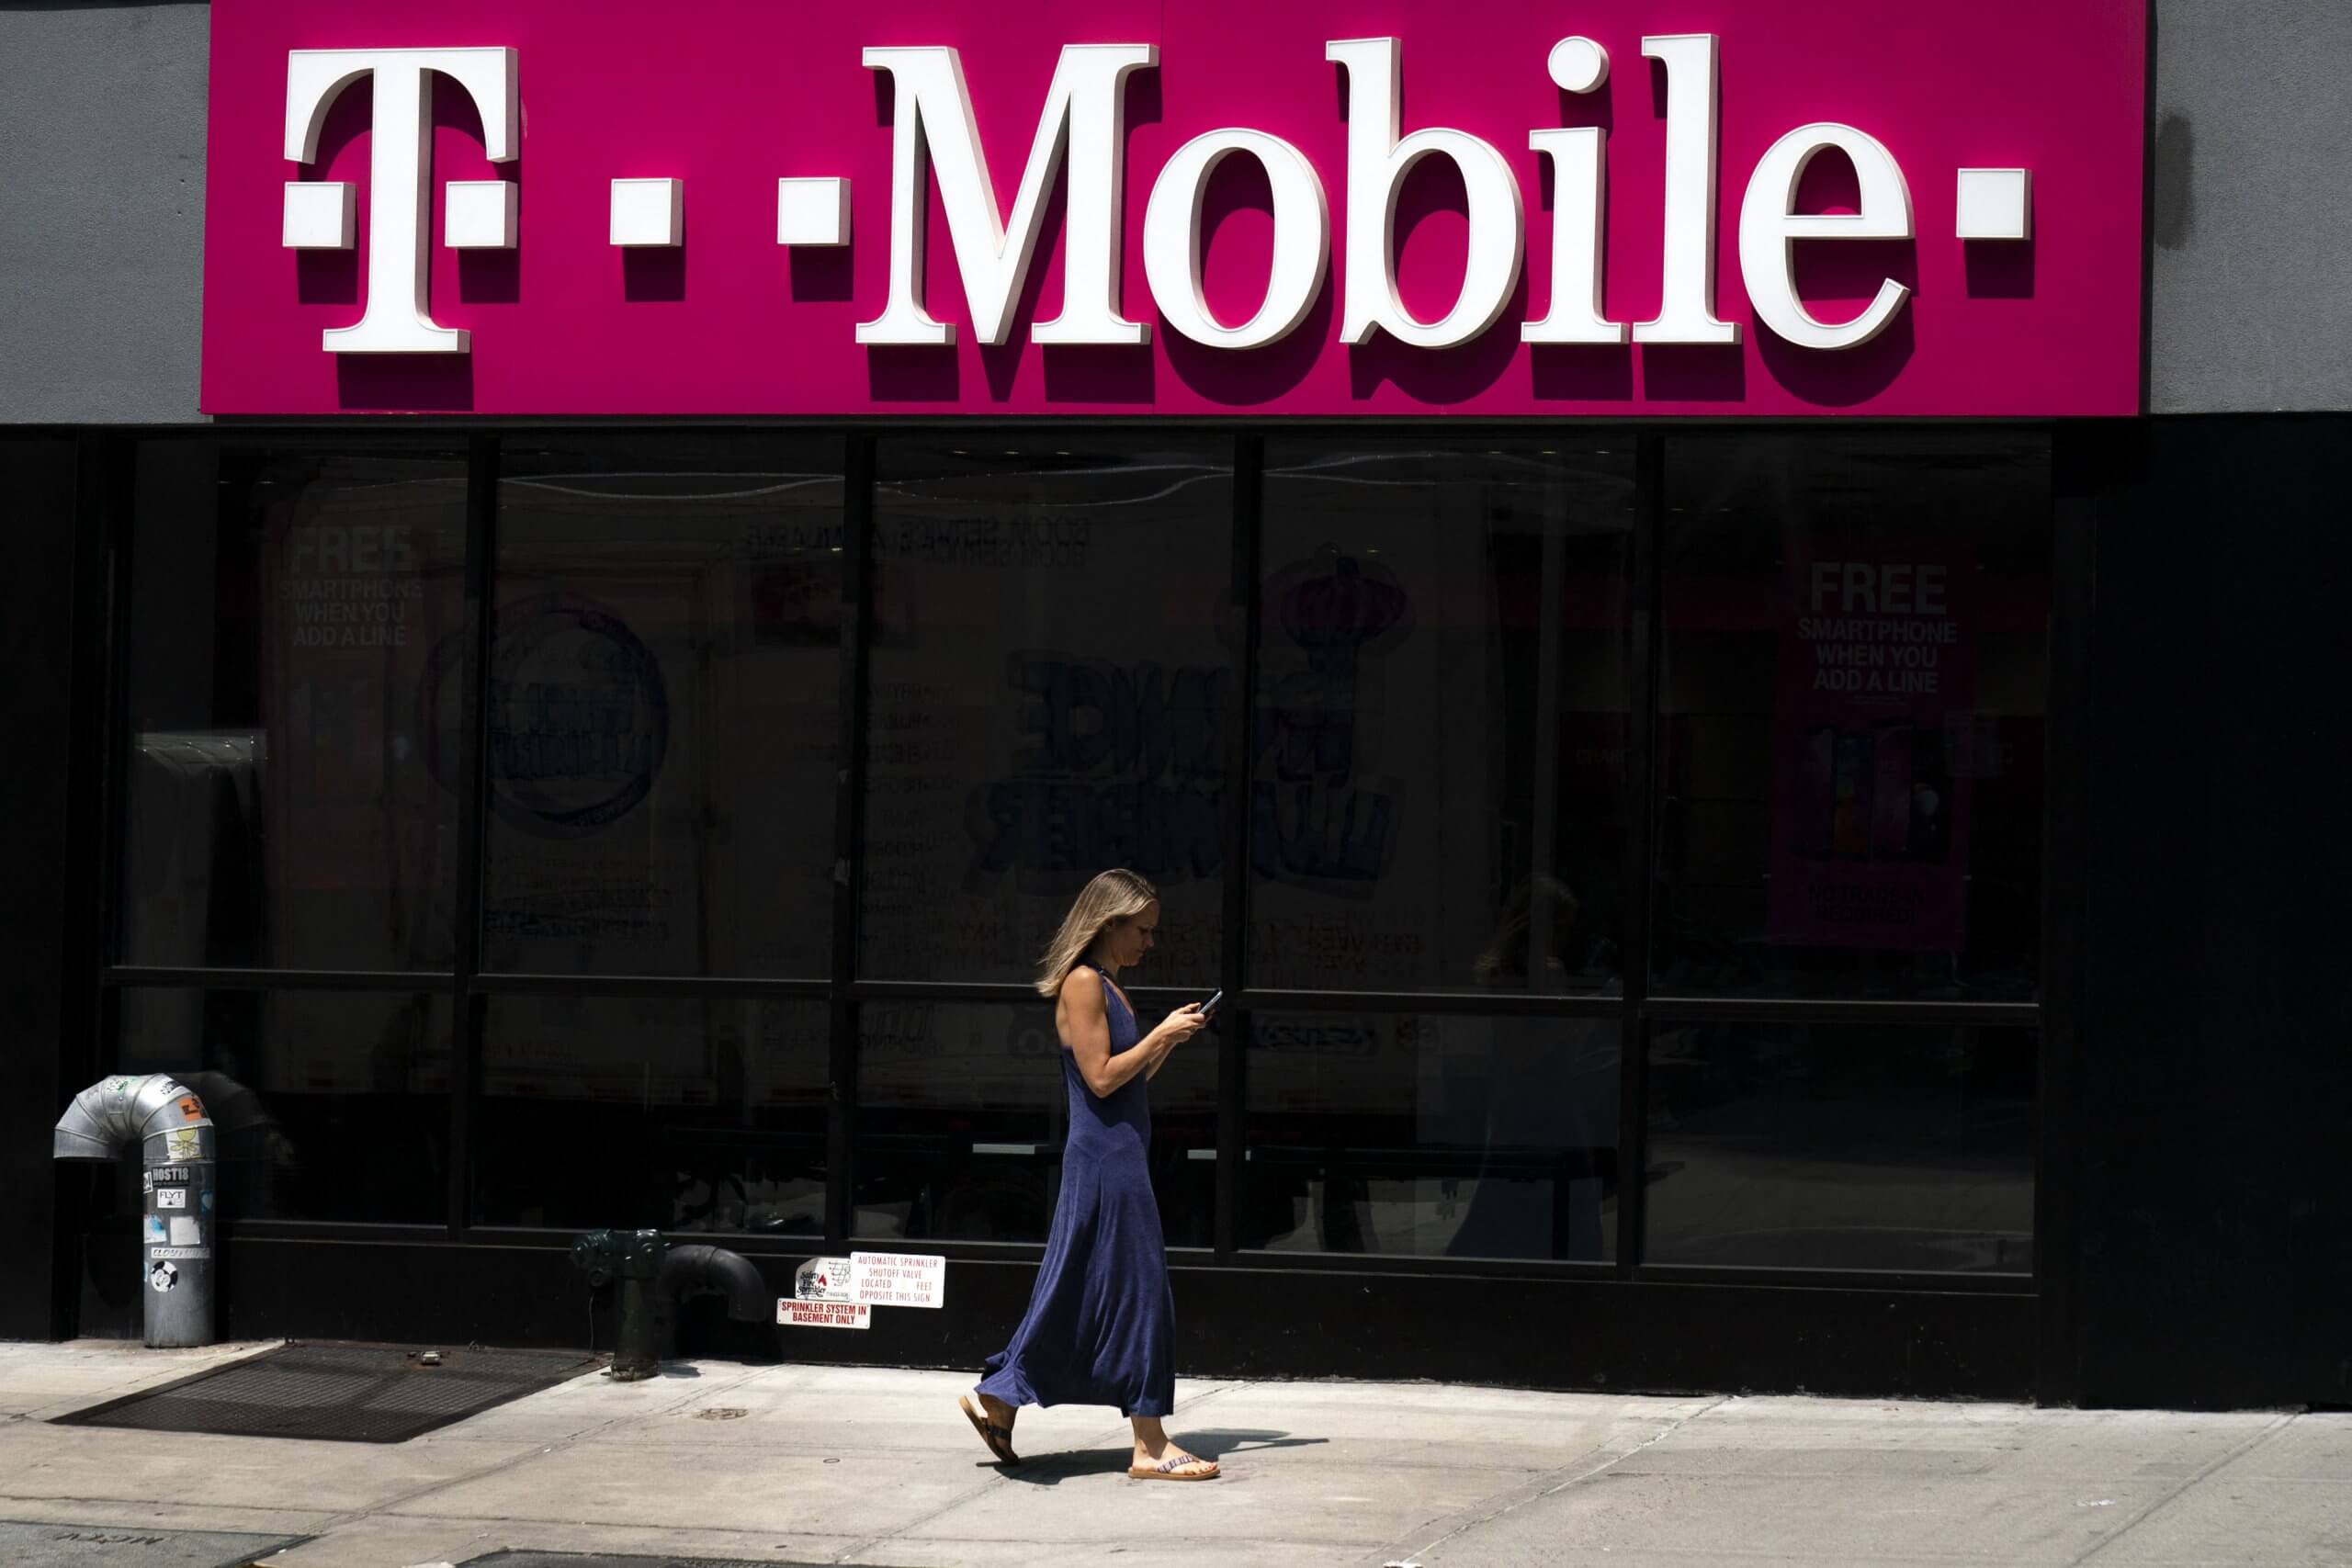 This is also not the first data breach incident involving T-Mobile